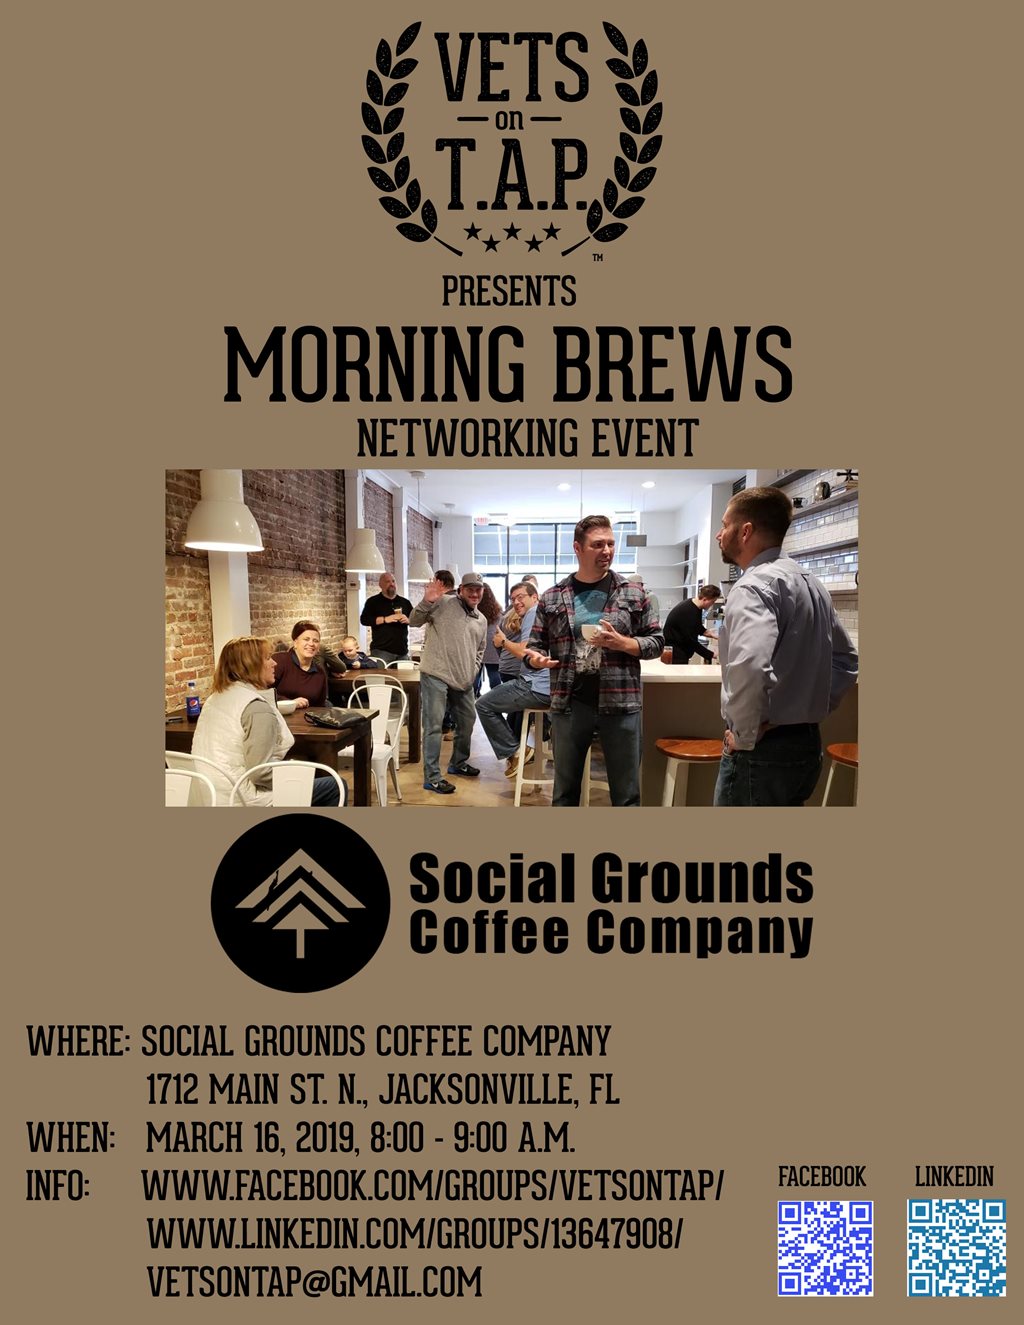 Vets on TAP presents a Morning Brews Networking Event at Social Grounds Coffee Company.